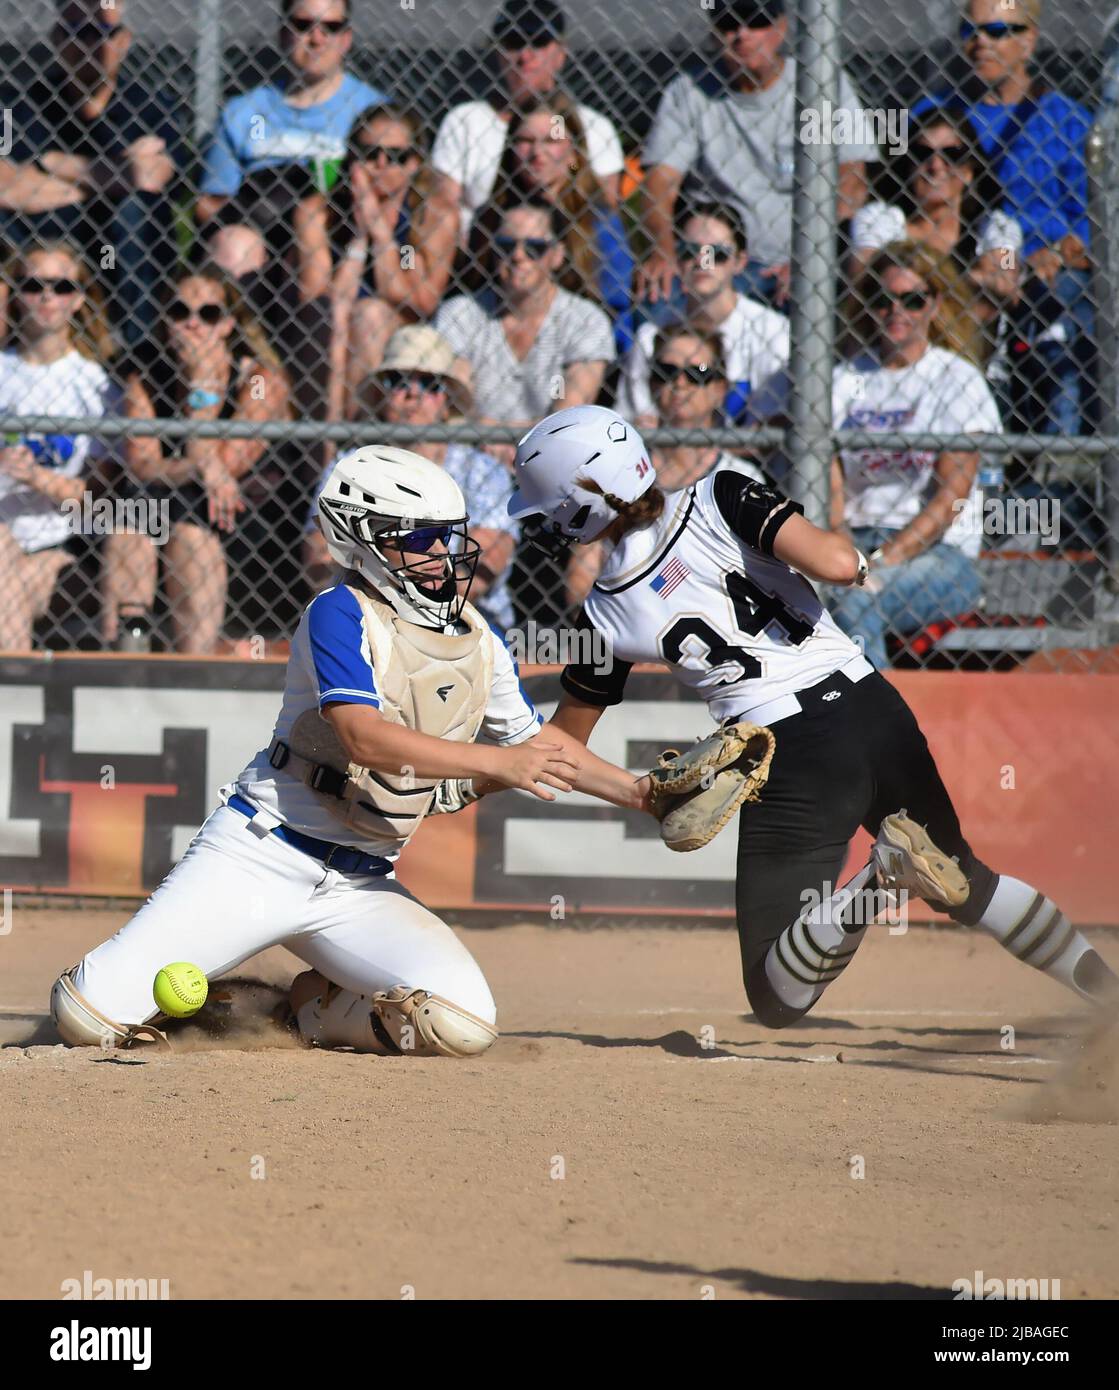 USA. Runner scoring as the opposing catcher was unable to secure the ball on a throw from the outfield prior to applying a tag. Stock Photo